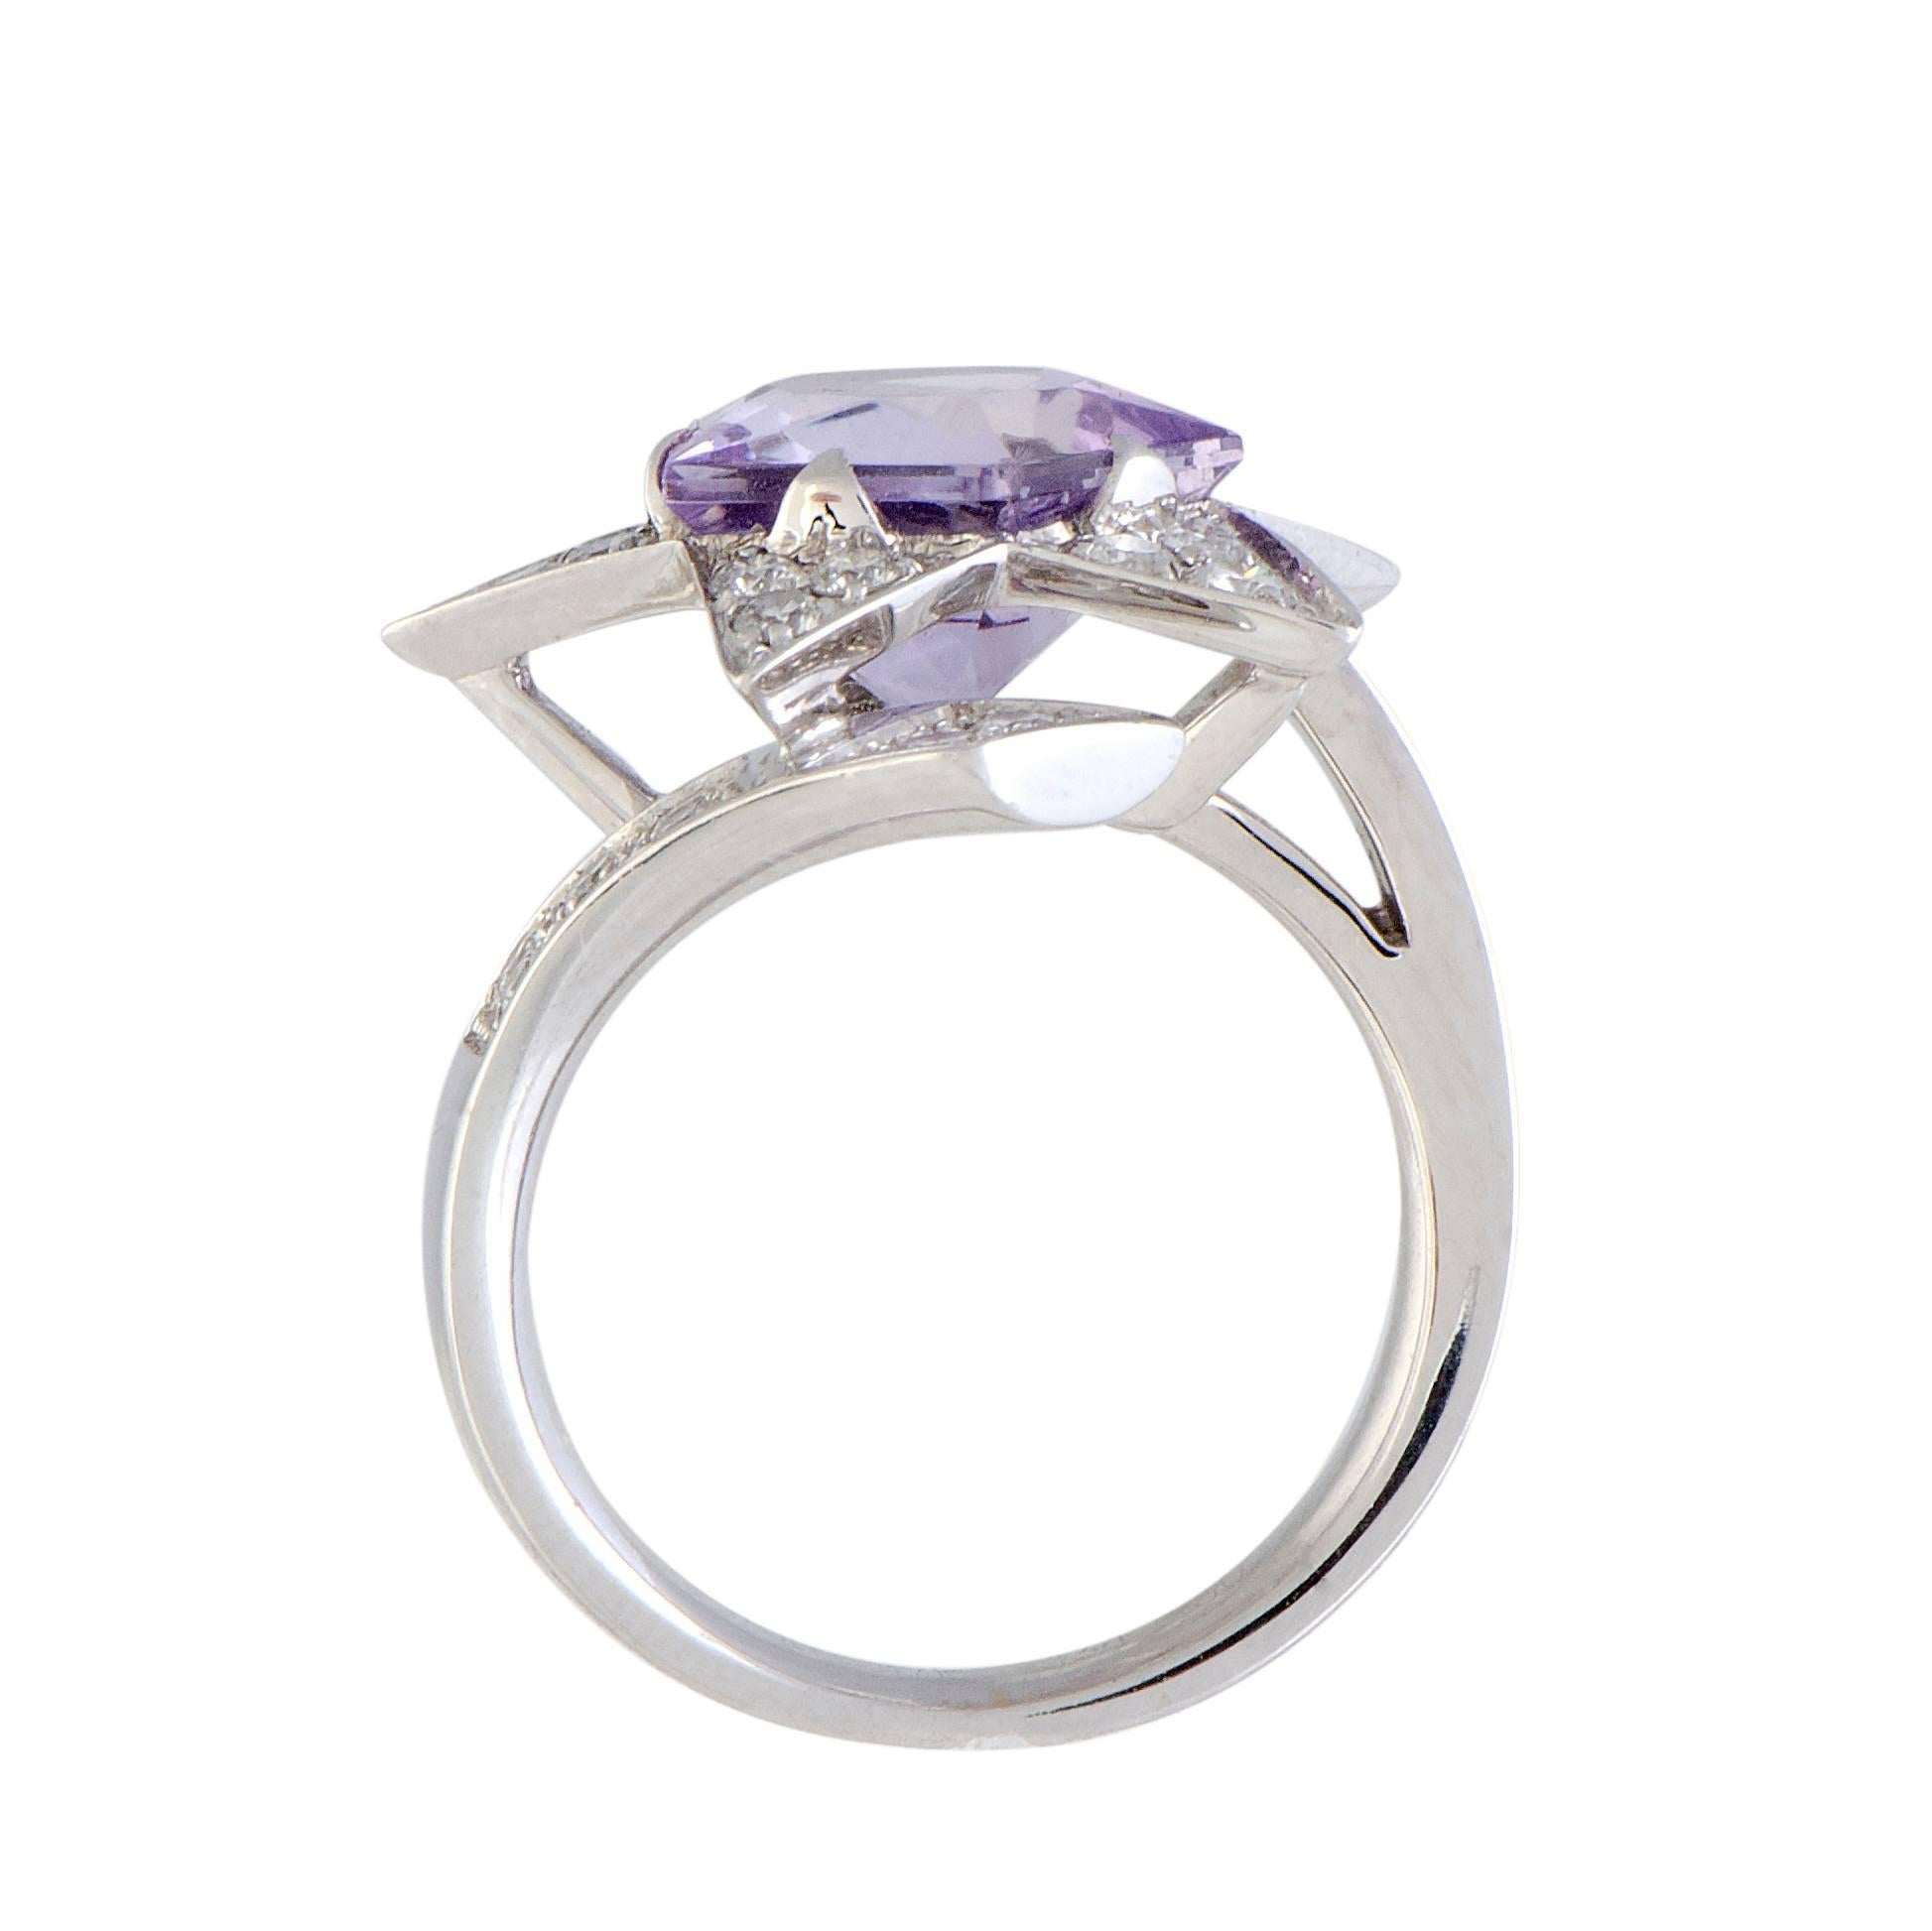 From the majestic “Comète” collection designed by Chanel comes this stunning ring made of prestigious 18K white gold that features glamorous, fashionable appearance. The ring is decorated with a striking amethyst and 0.55 carats of scintillating